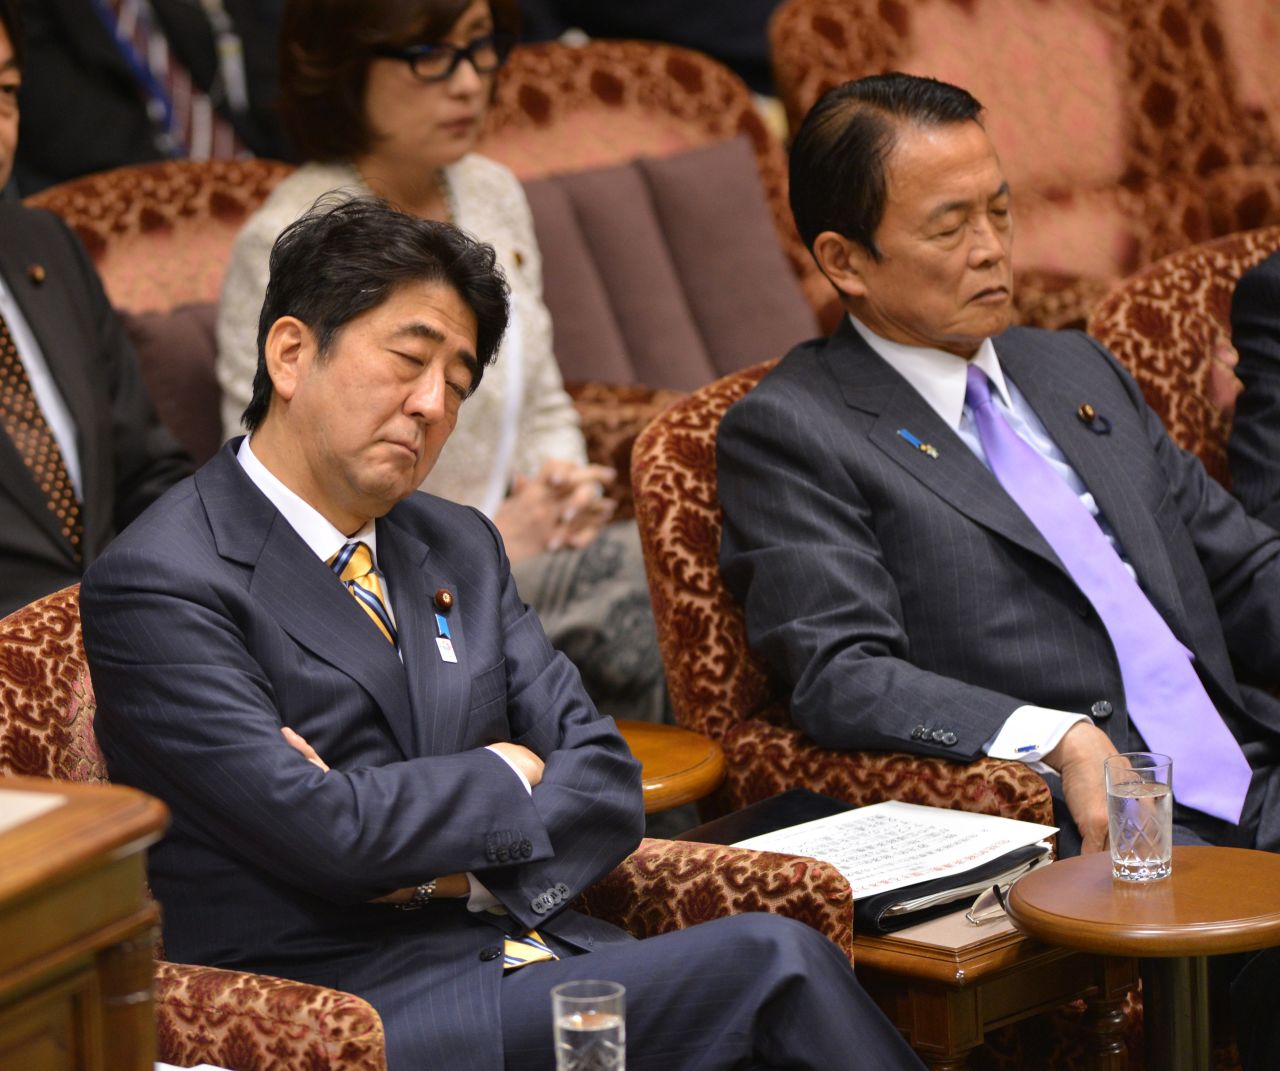 Japanese Prime Minister Shinzo Abe (L) and Finance Minister Taro Aso "listen" to a question from an opposition lawmaker during a budget session at the National Diet in Tokyo in February 2013.